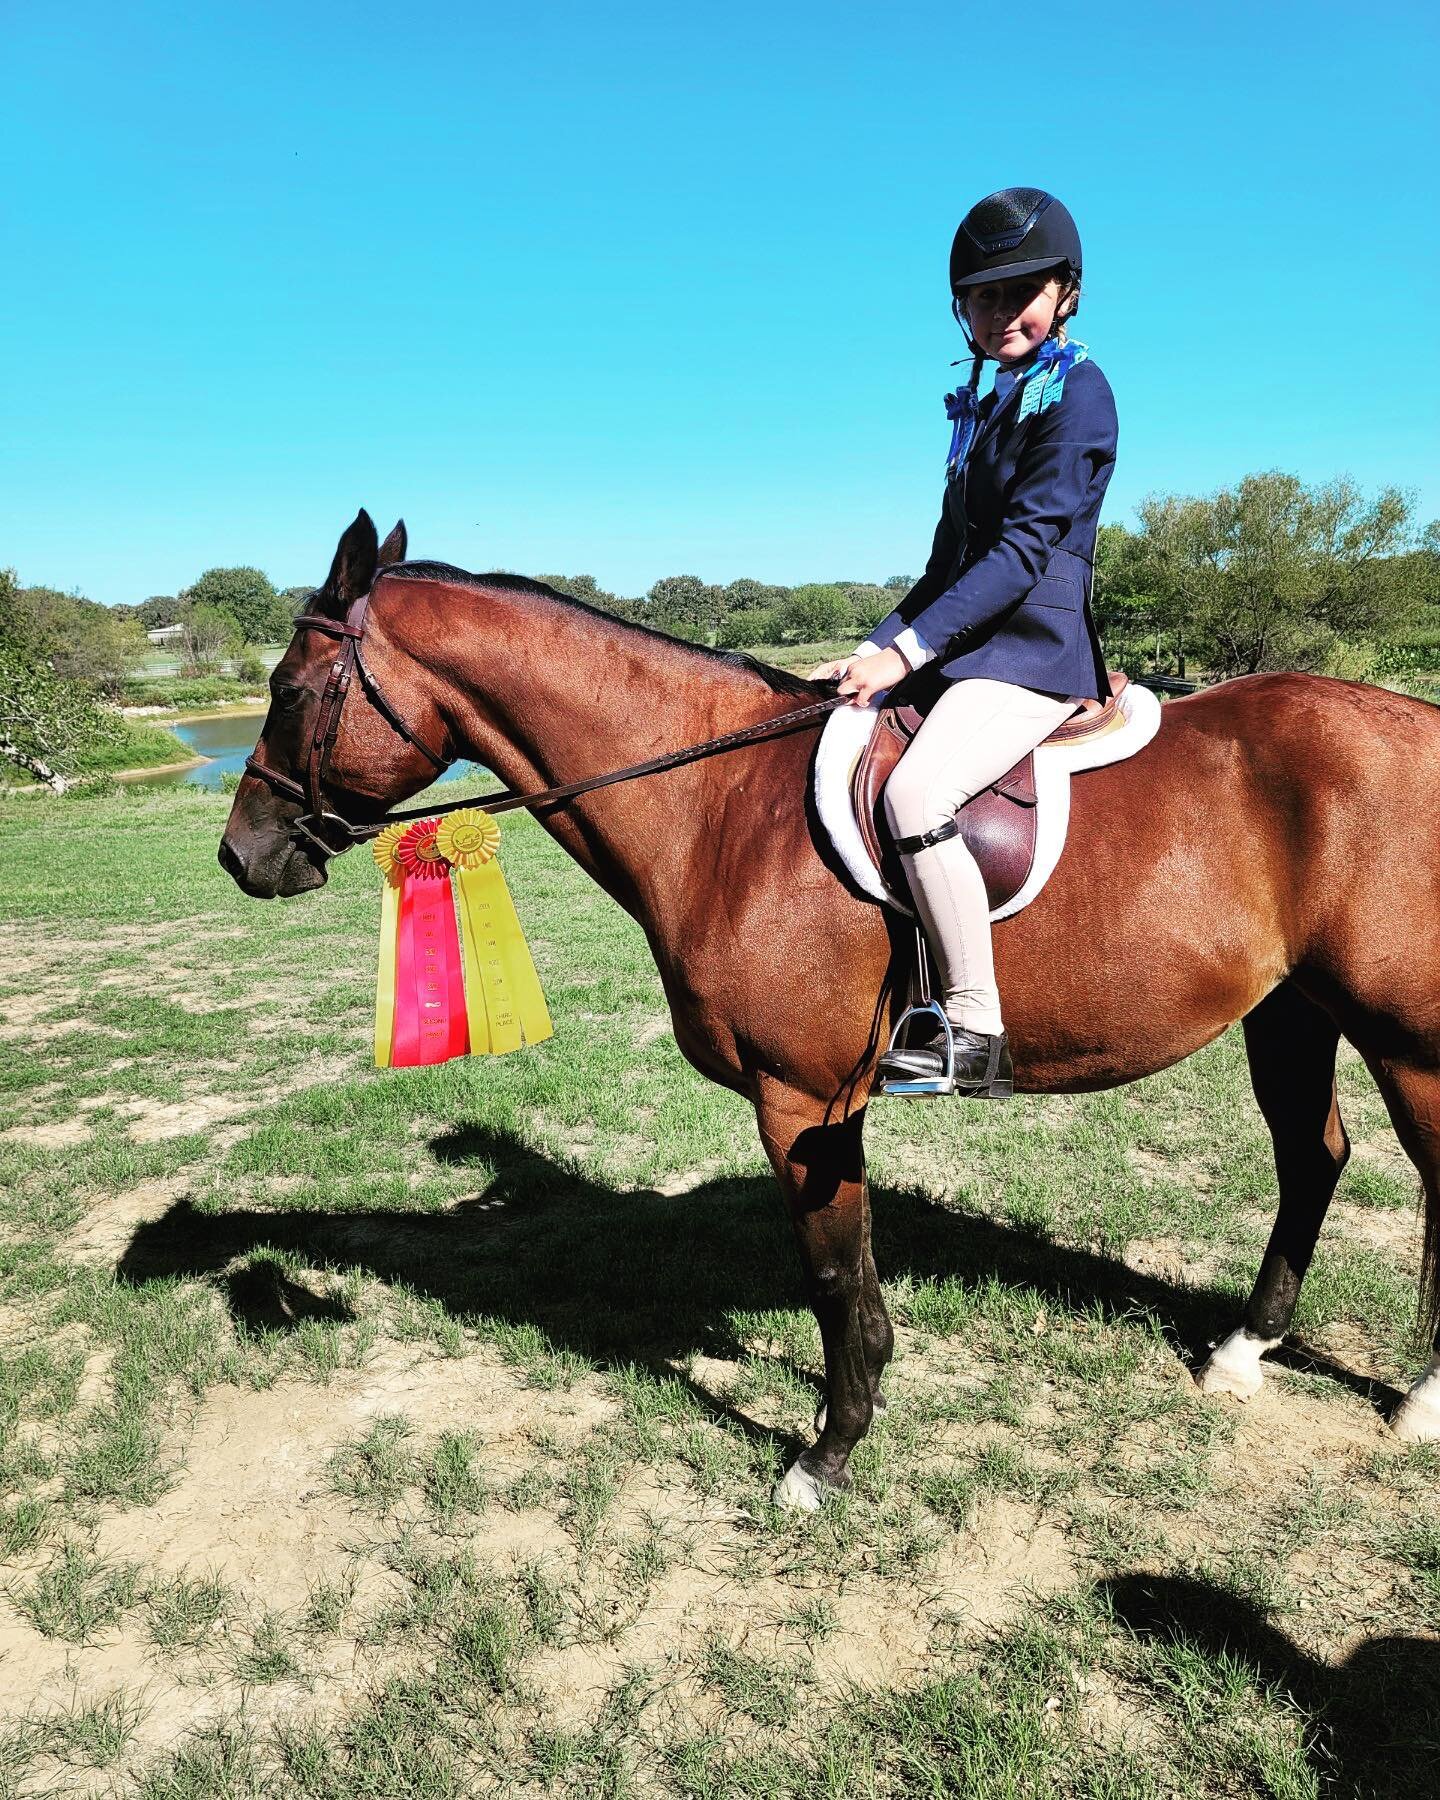 Last weekend @_hiddenlakes_, Adliegh and Mister Dallas won 2nd in the walk trot eq on the flat, and had 2 - 3rd place in wt ground polls. This was the first time showing for both the horse and rider!